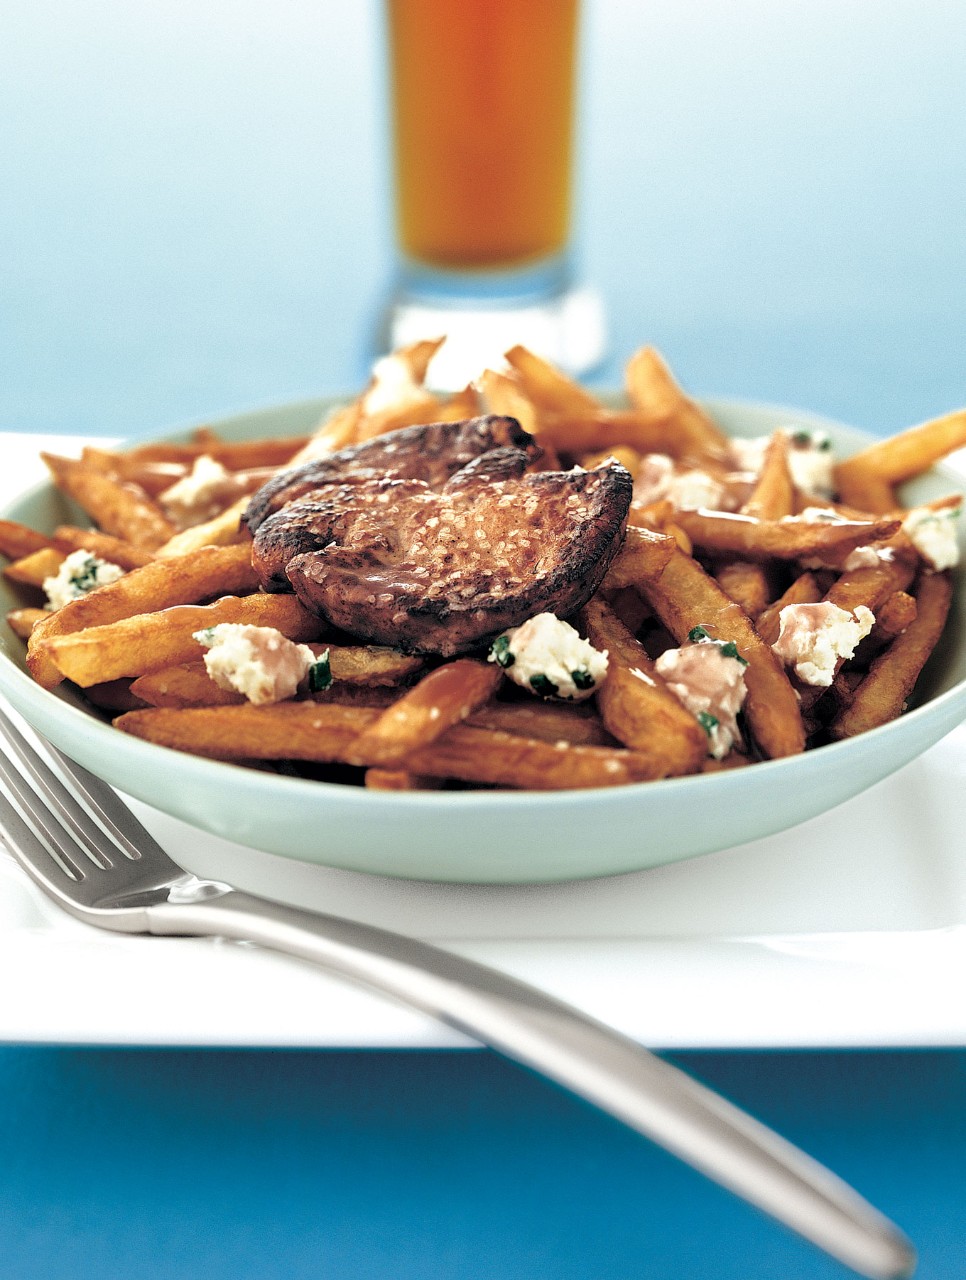 French Fries with Poutine